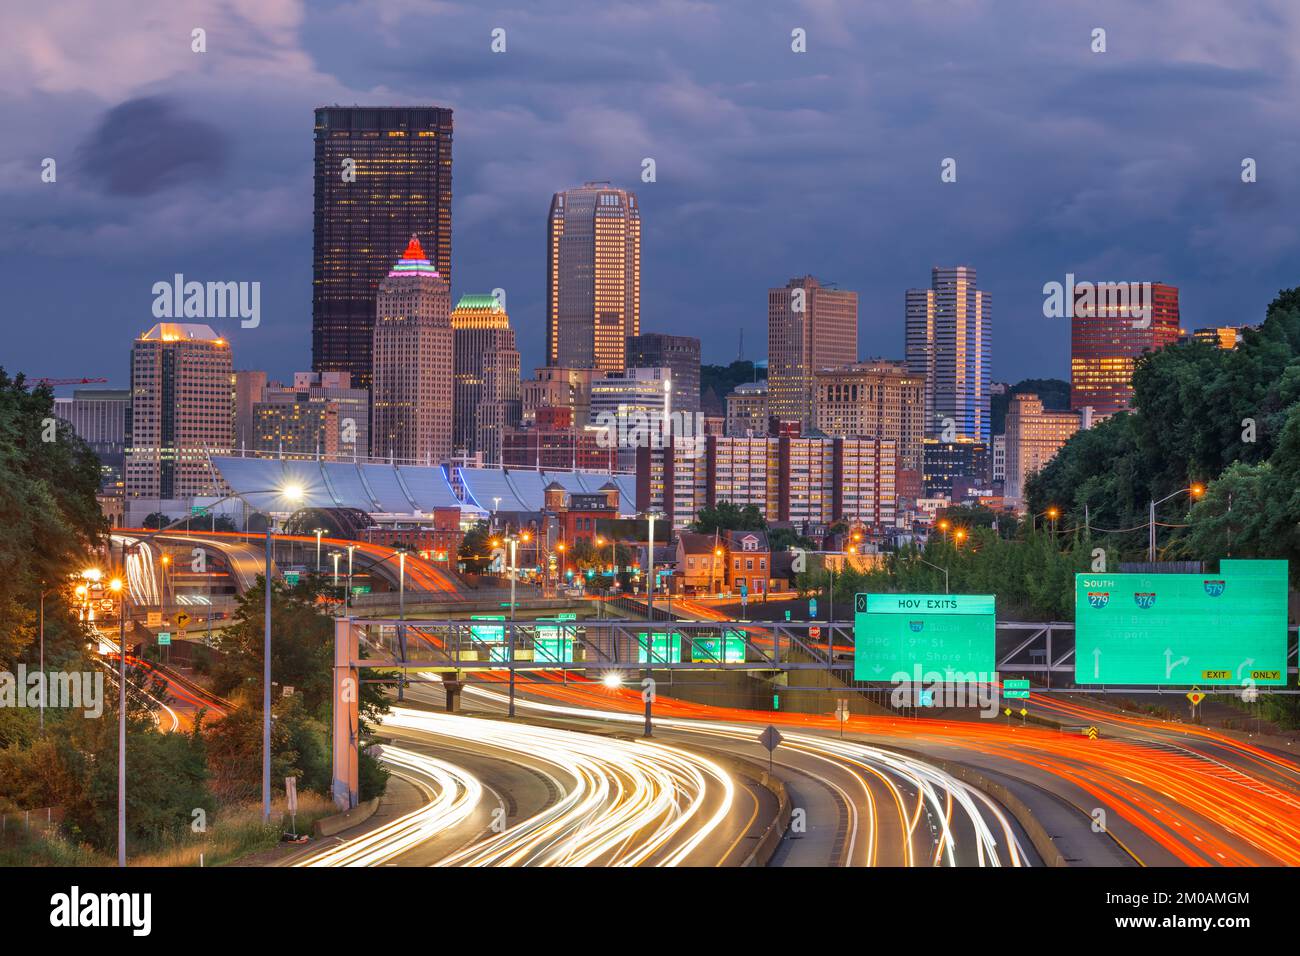 Pittsburgh, Pennsylvania, USA downtown city skyline over looking highways at dusk. Stock Photo